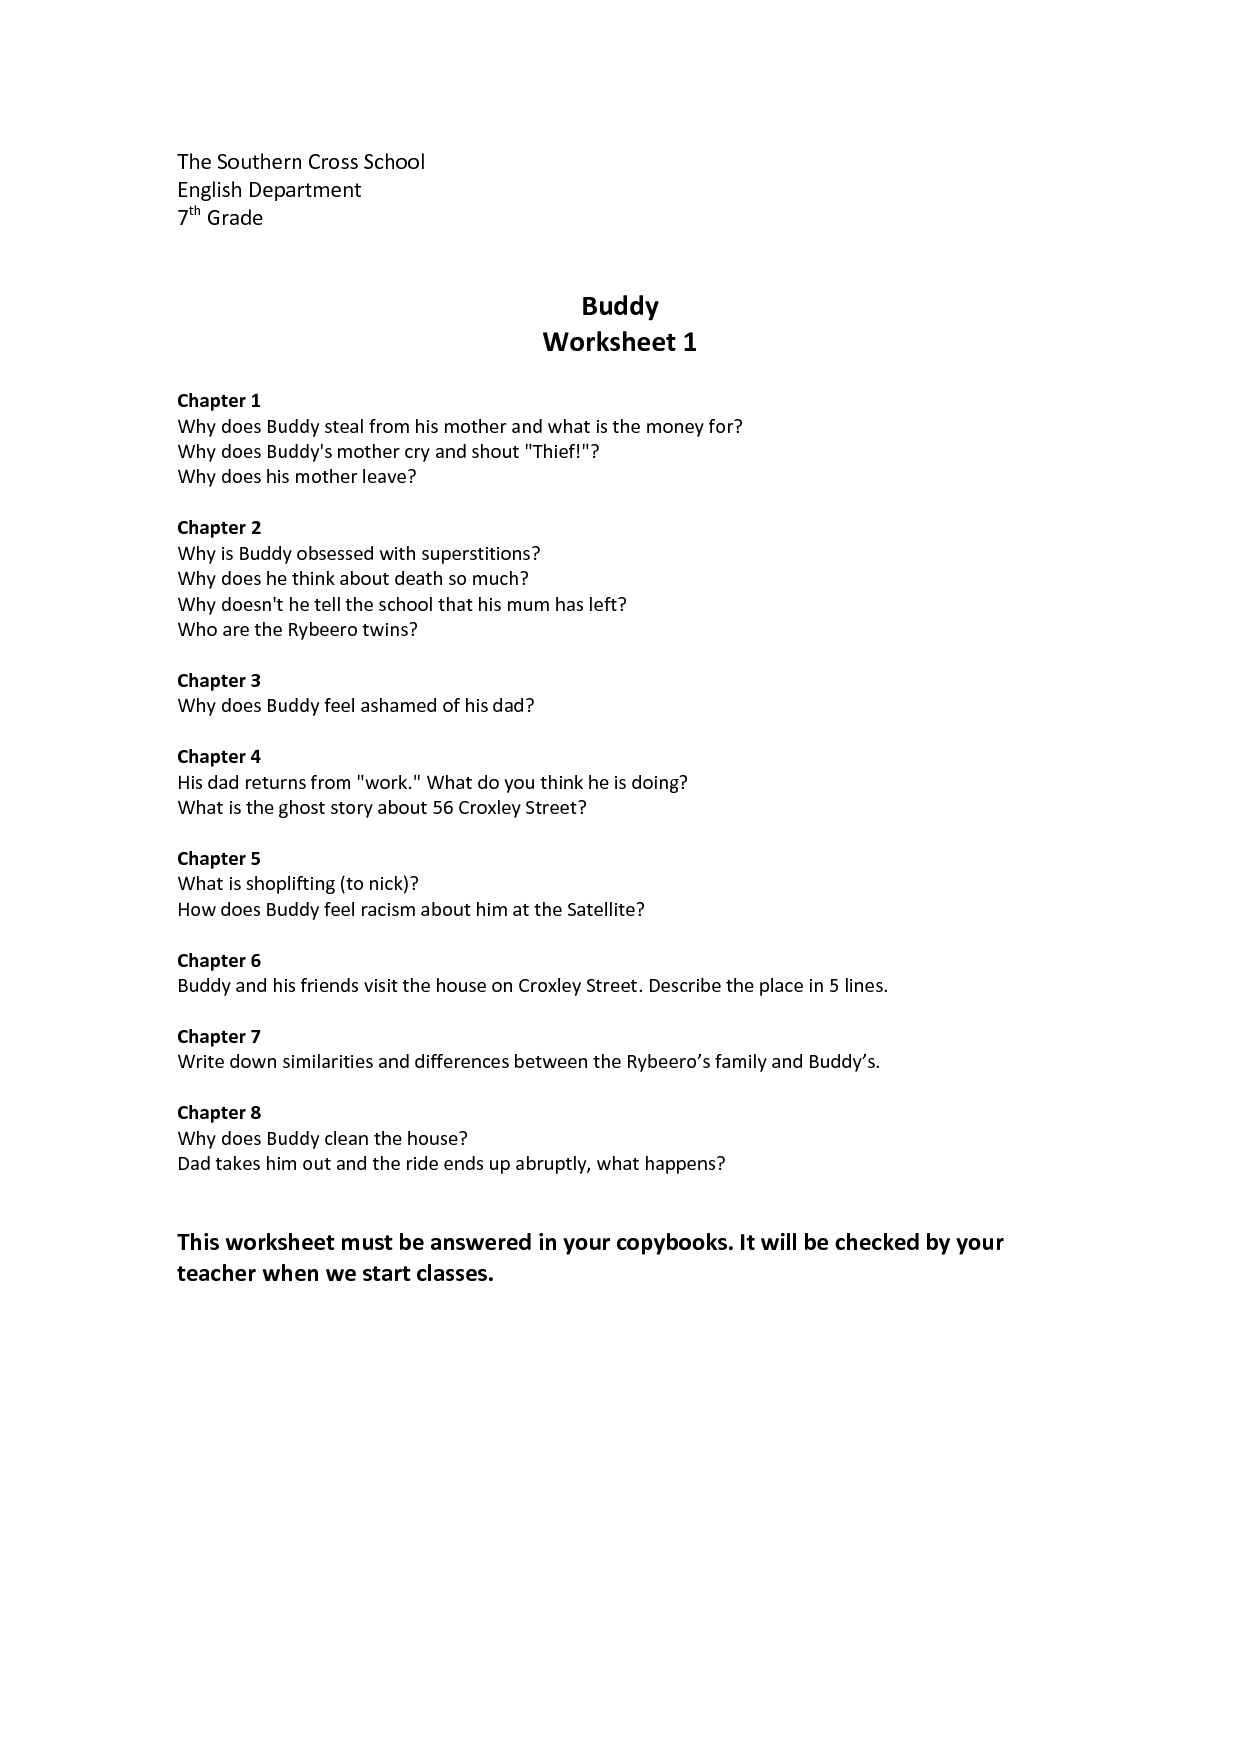 20-best-images-of-seventh-grade-history-worksheets-7th-grade-science